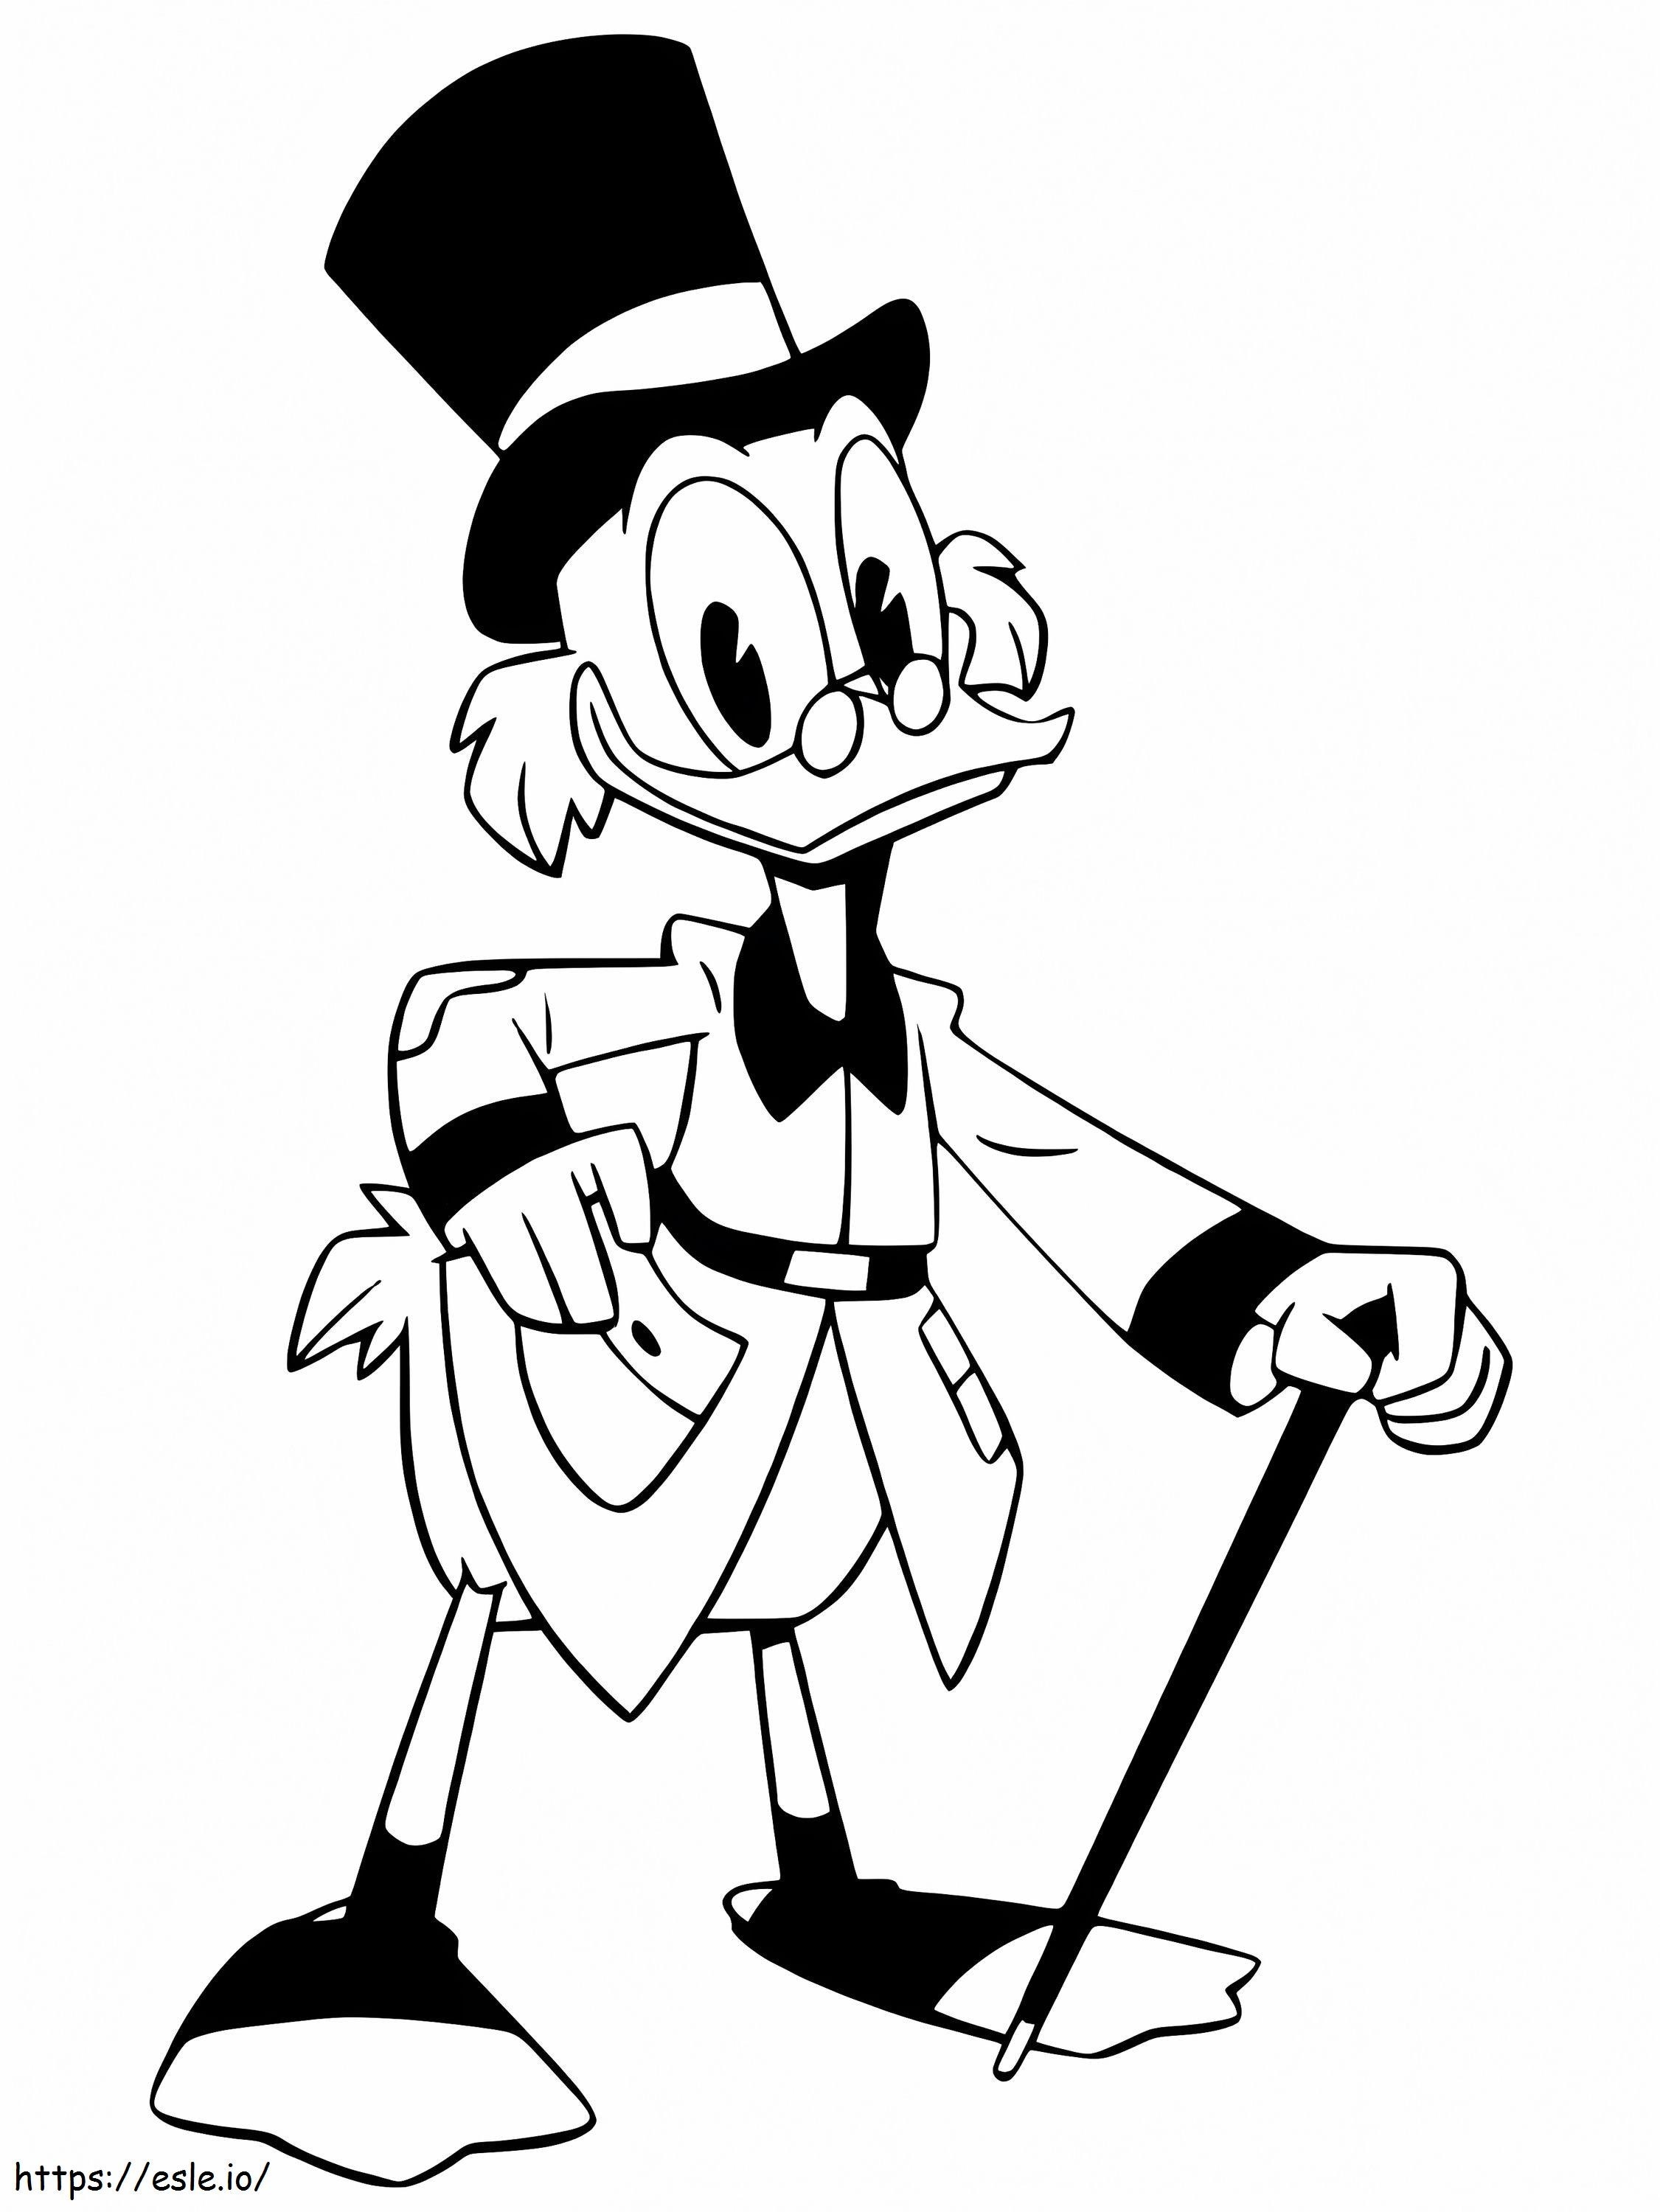 Scrooge Mcduck From Ducktales Coloring Page